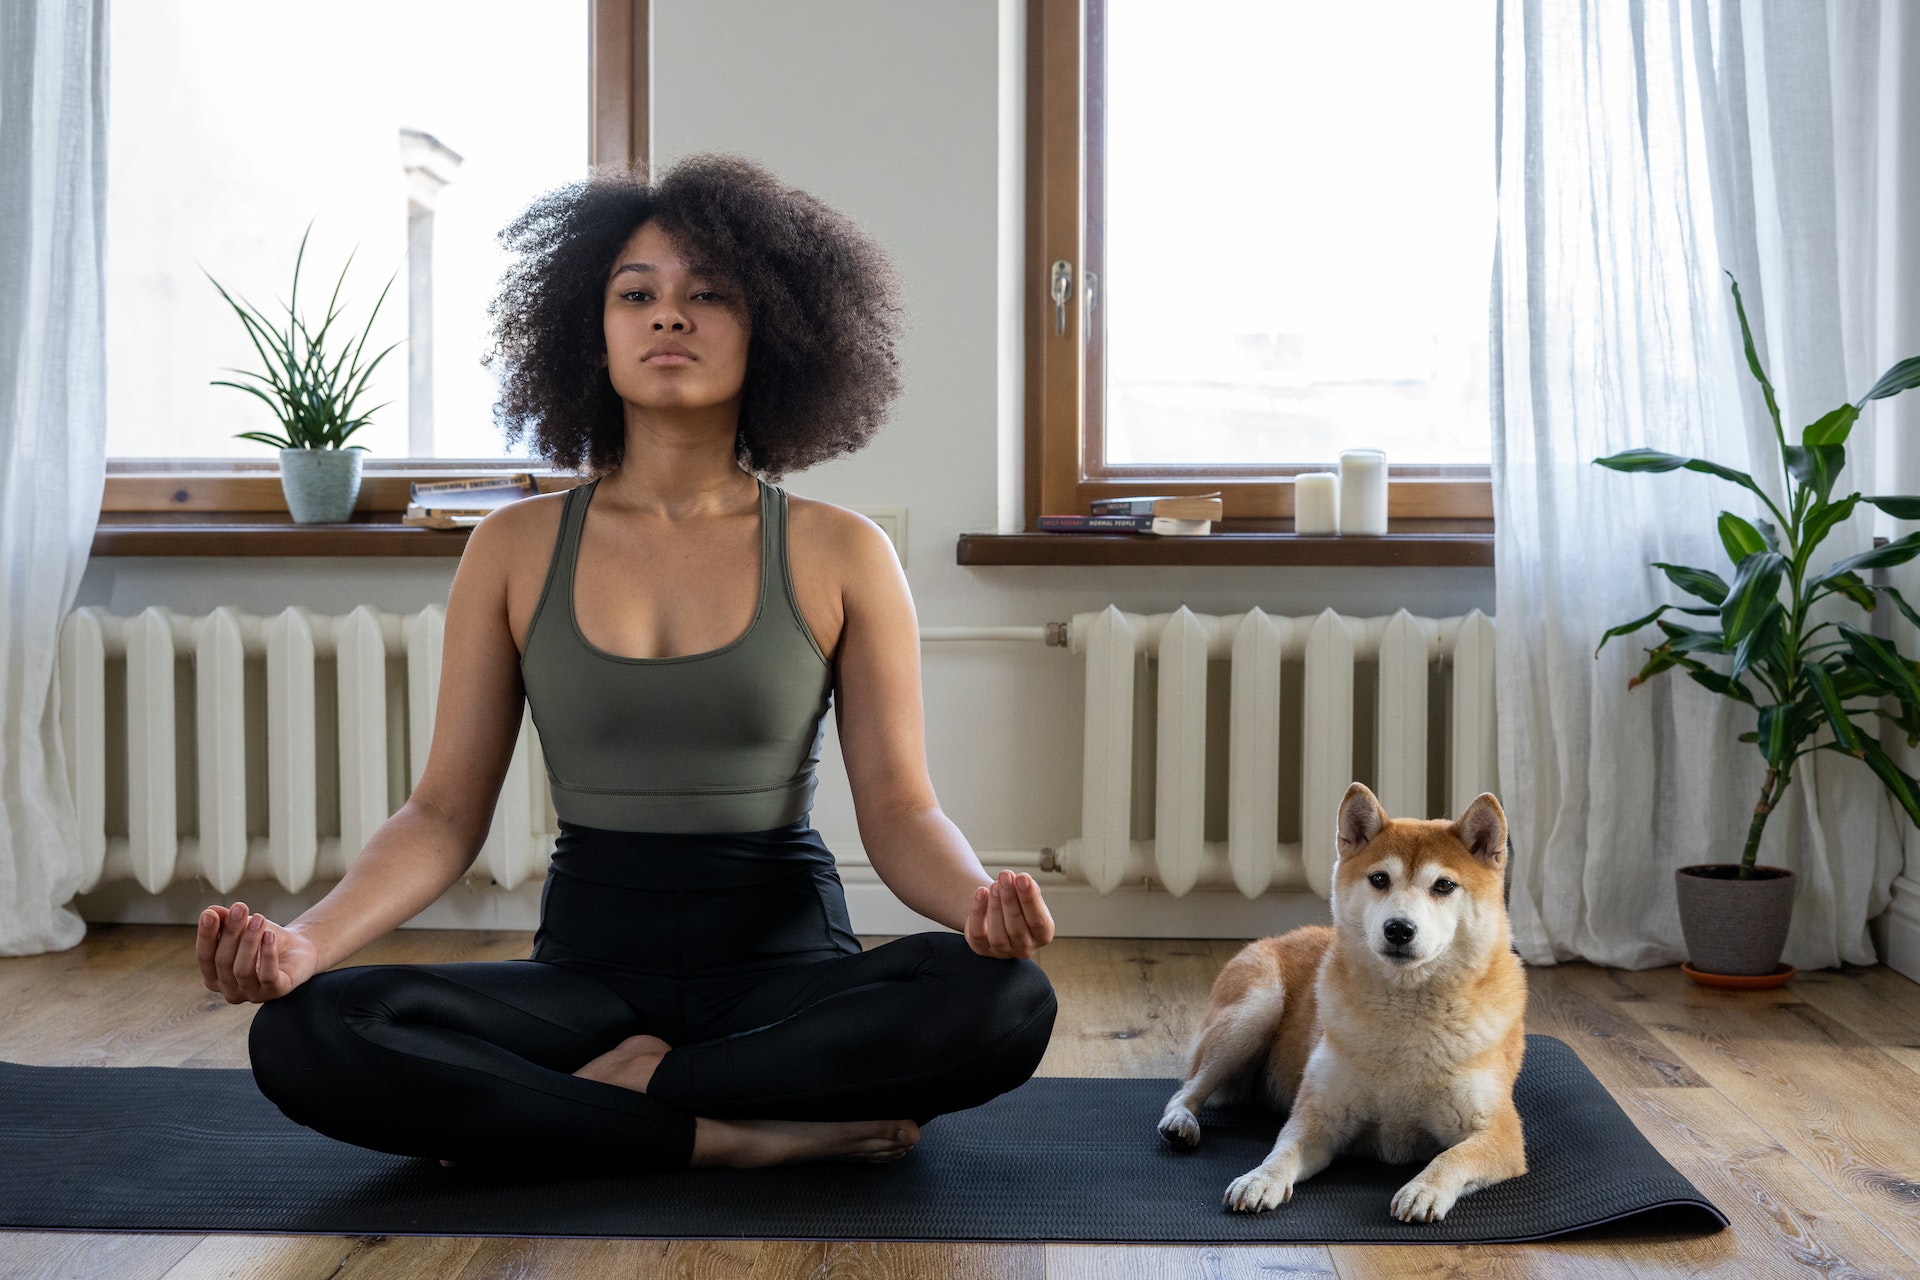 How To Do Meditation At Home When You’re A Beginner